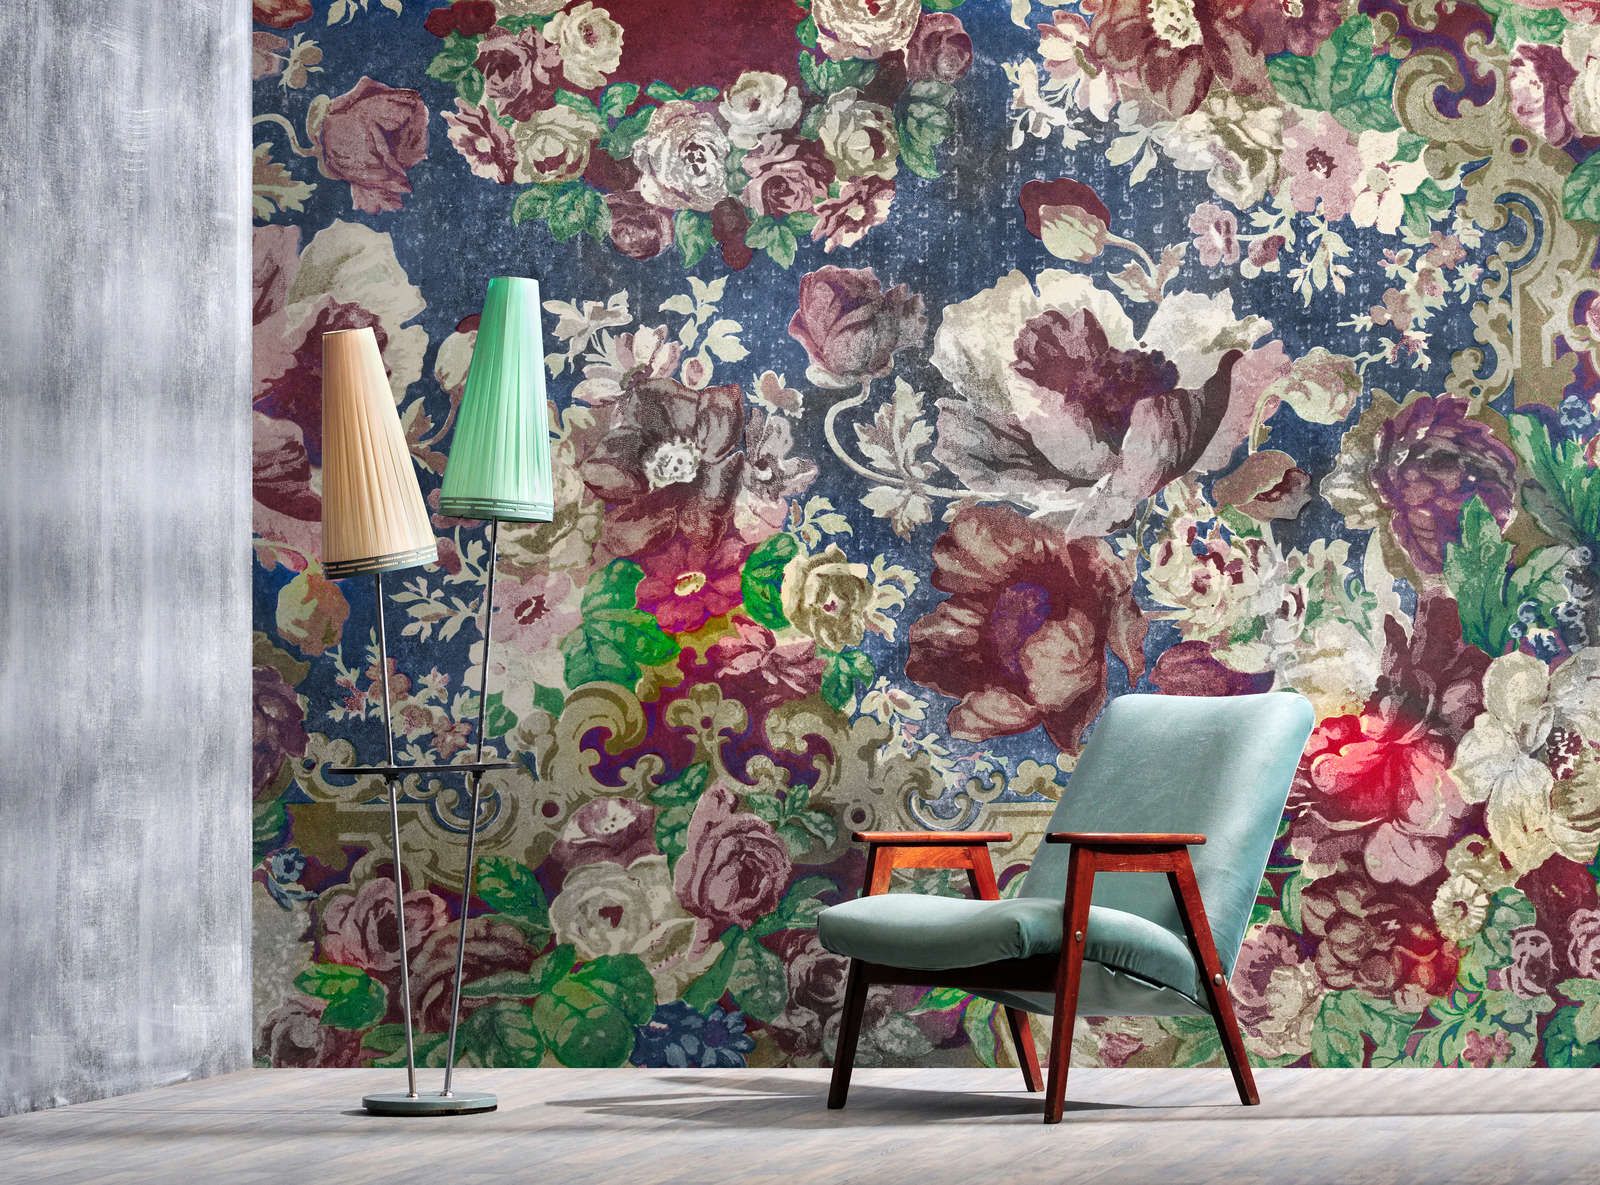             Photo wallpaper »carmente 2« - Classic style floral pattern against a vintage plaster texture - Colourful | Smooth, slightly shiny premium non-woven fabric
        